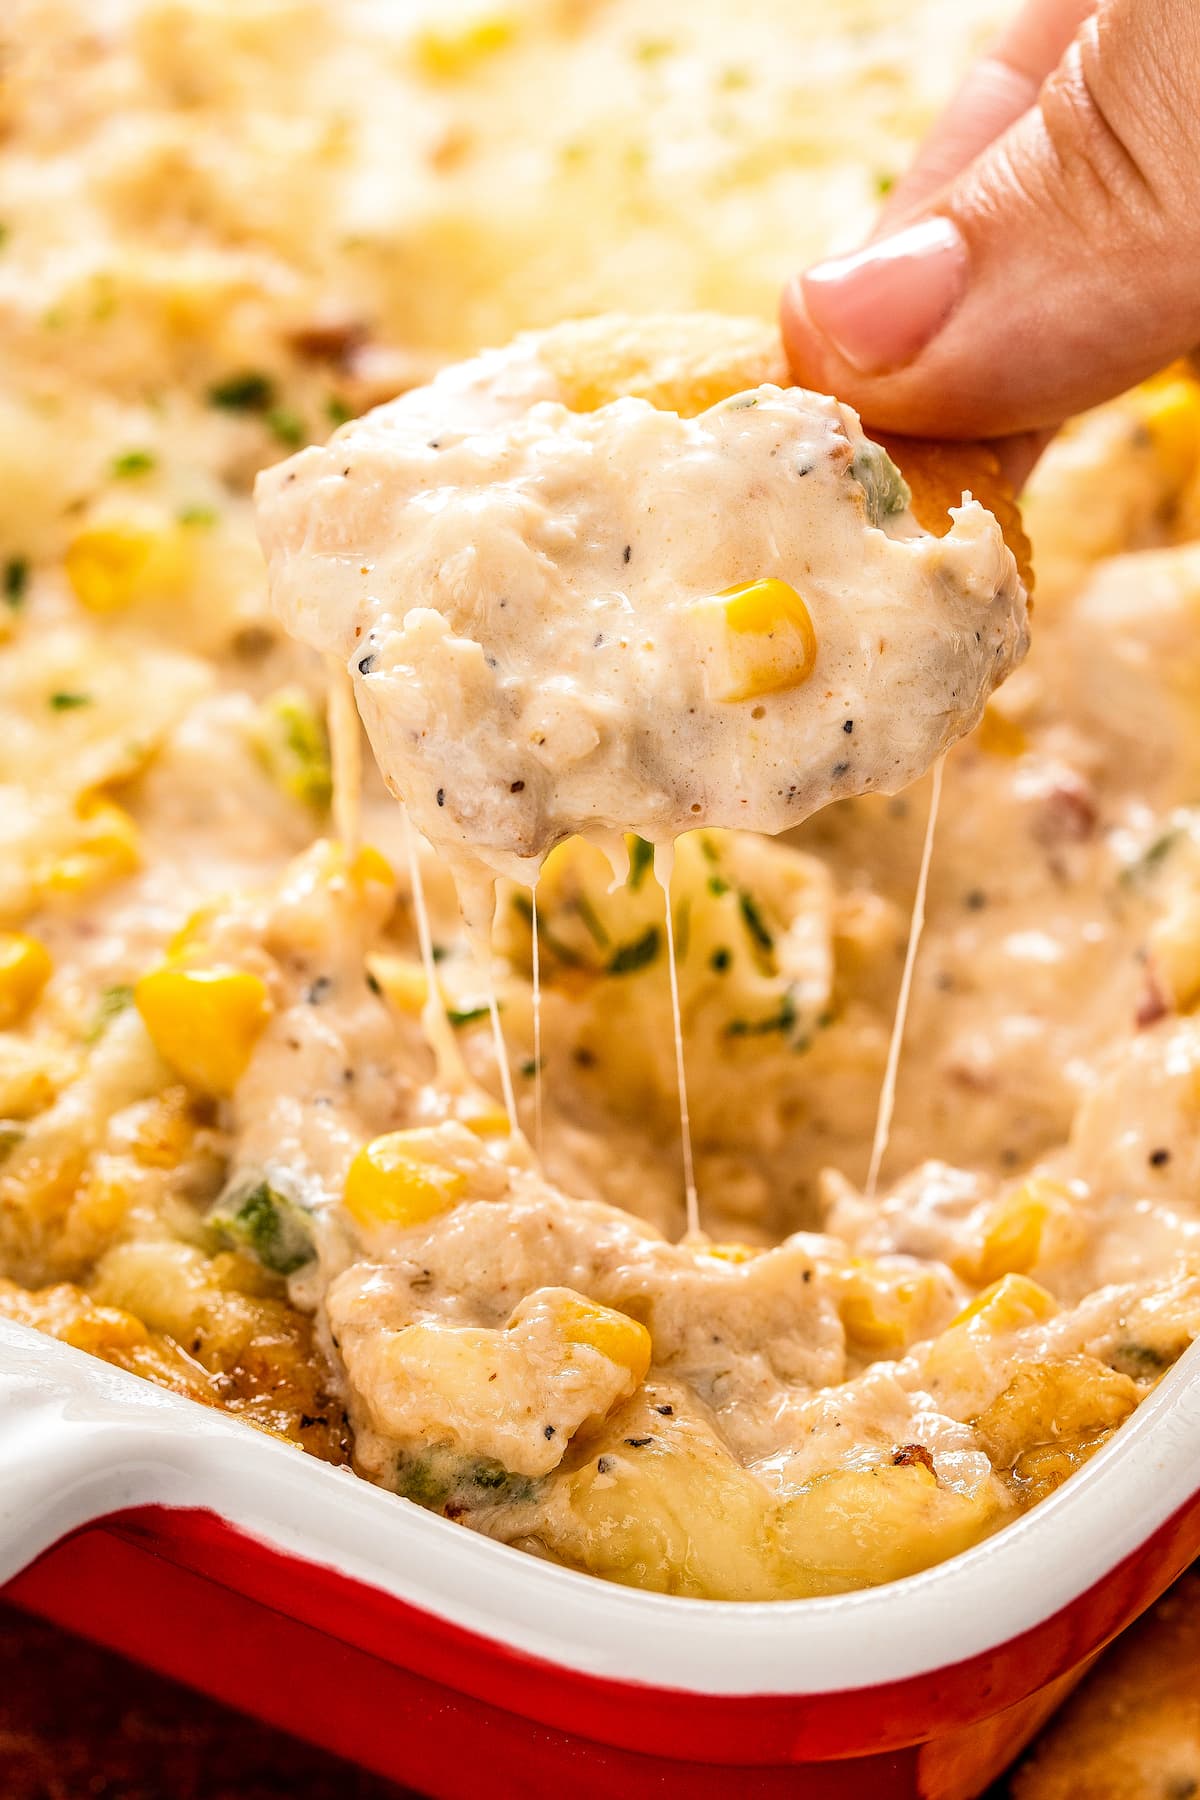 Fingers holding a Ritz cracker covered in Cajun crab dip, over a casserole dish full of dip.